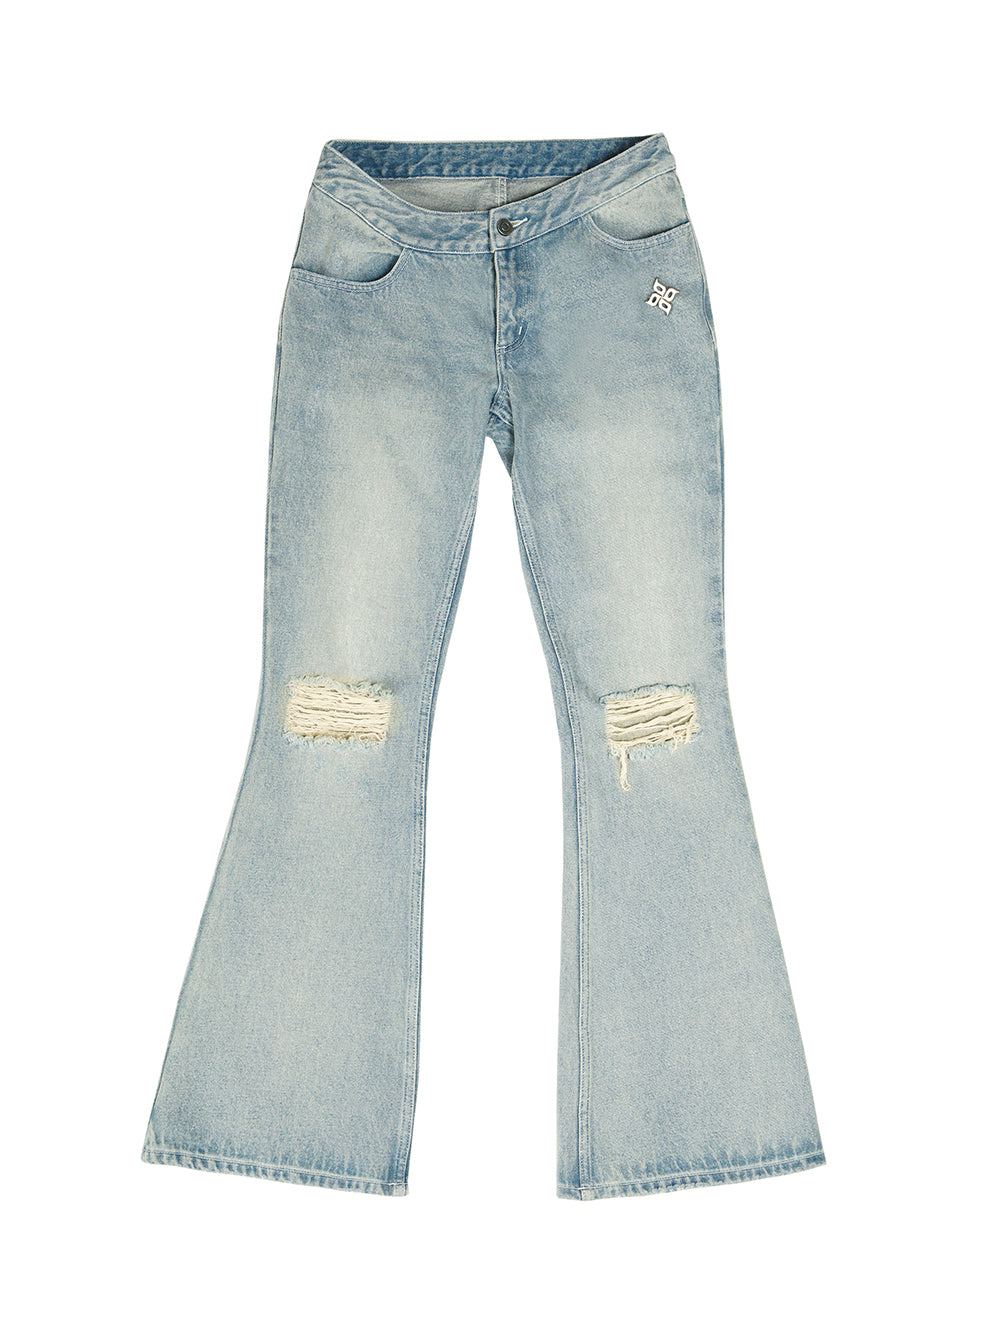 MUKTANK×ARDENCODE W Imprint | Iron Tag Safety Pin Water-Washed Loose Waist-Revealing Wide-Leg Flared Jeans